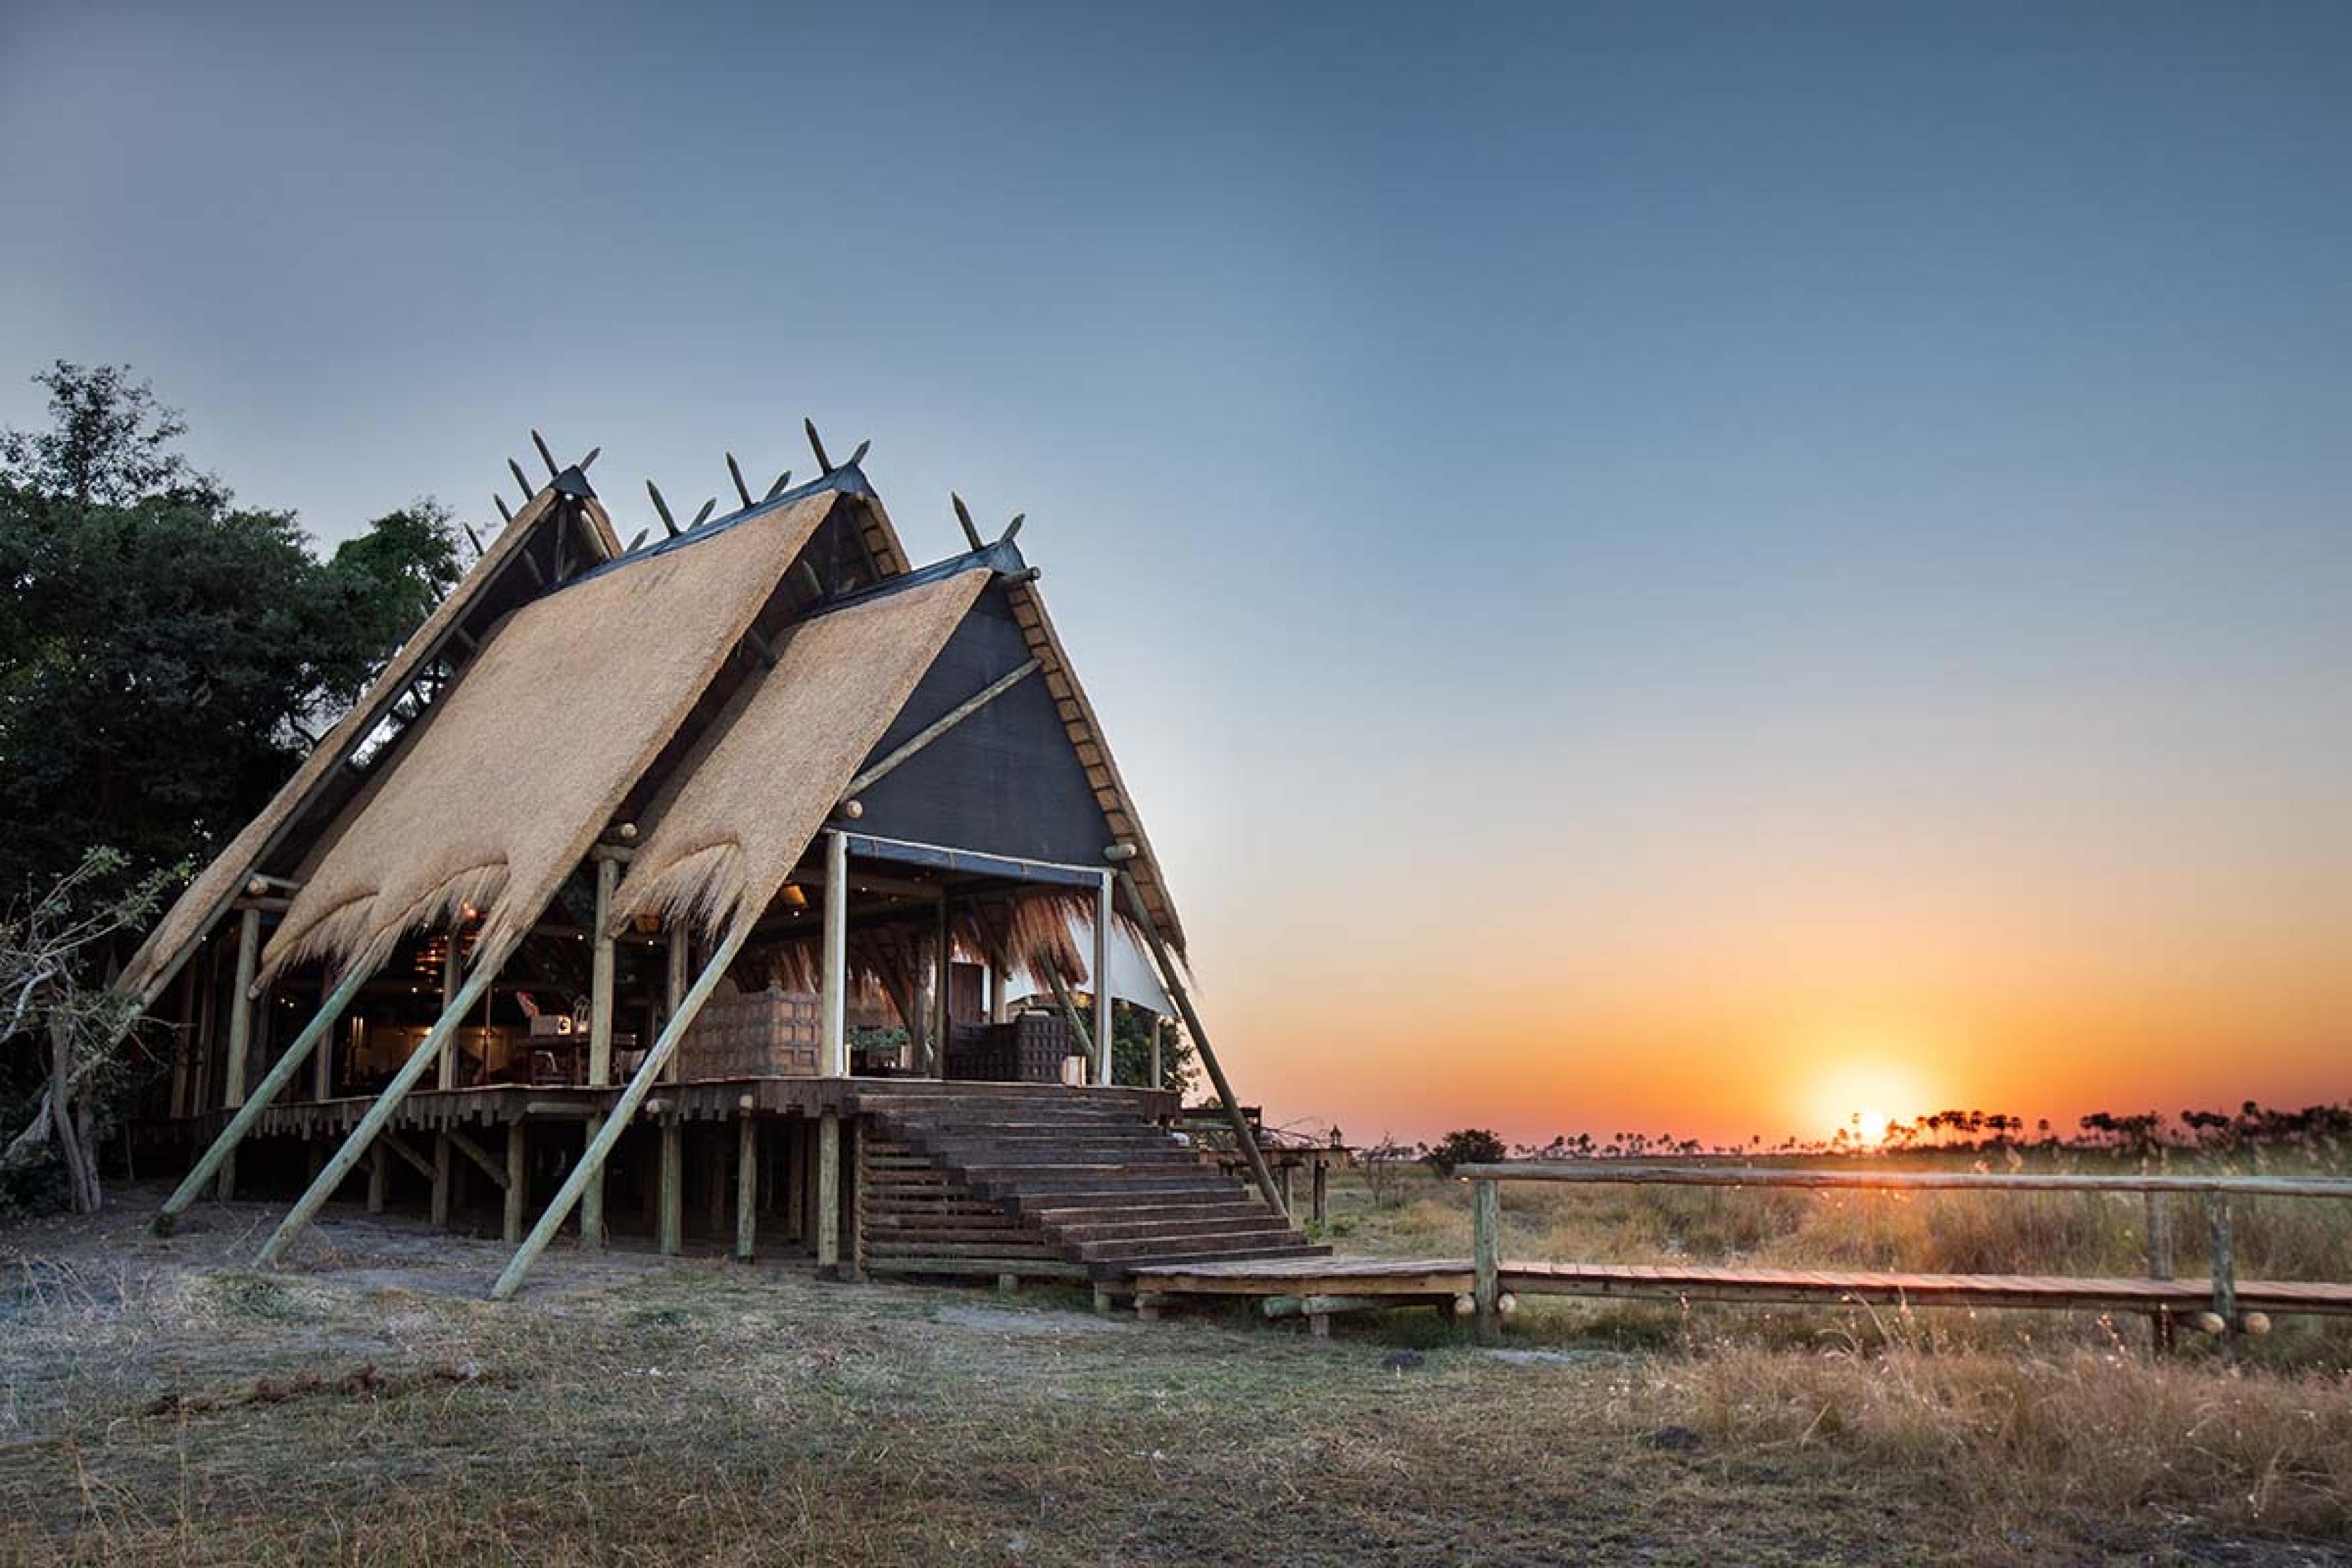 three tiered tents with a raised wooden walkway over a marsh at sunset